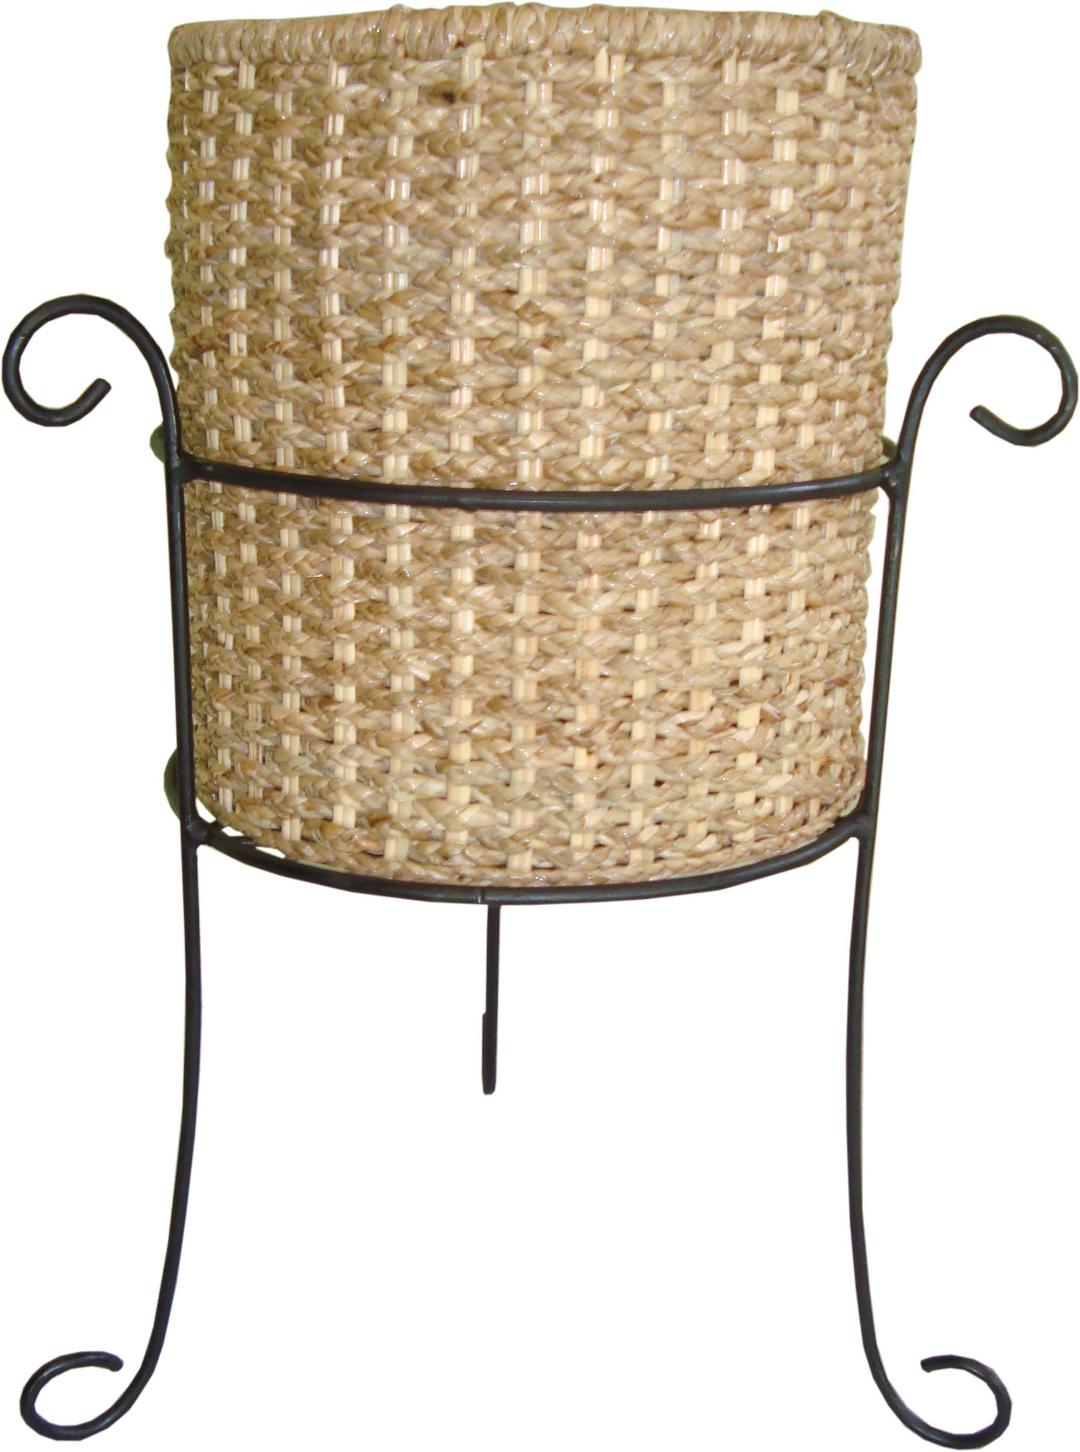 Cylindrical flower pot stand with metal legs